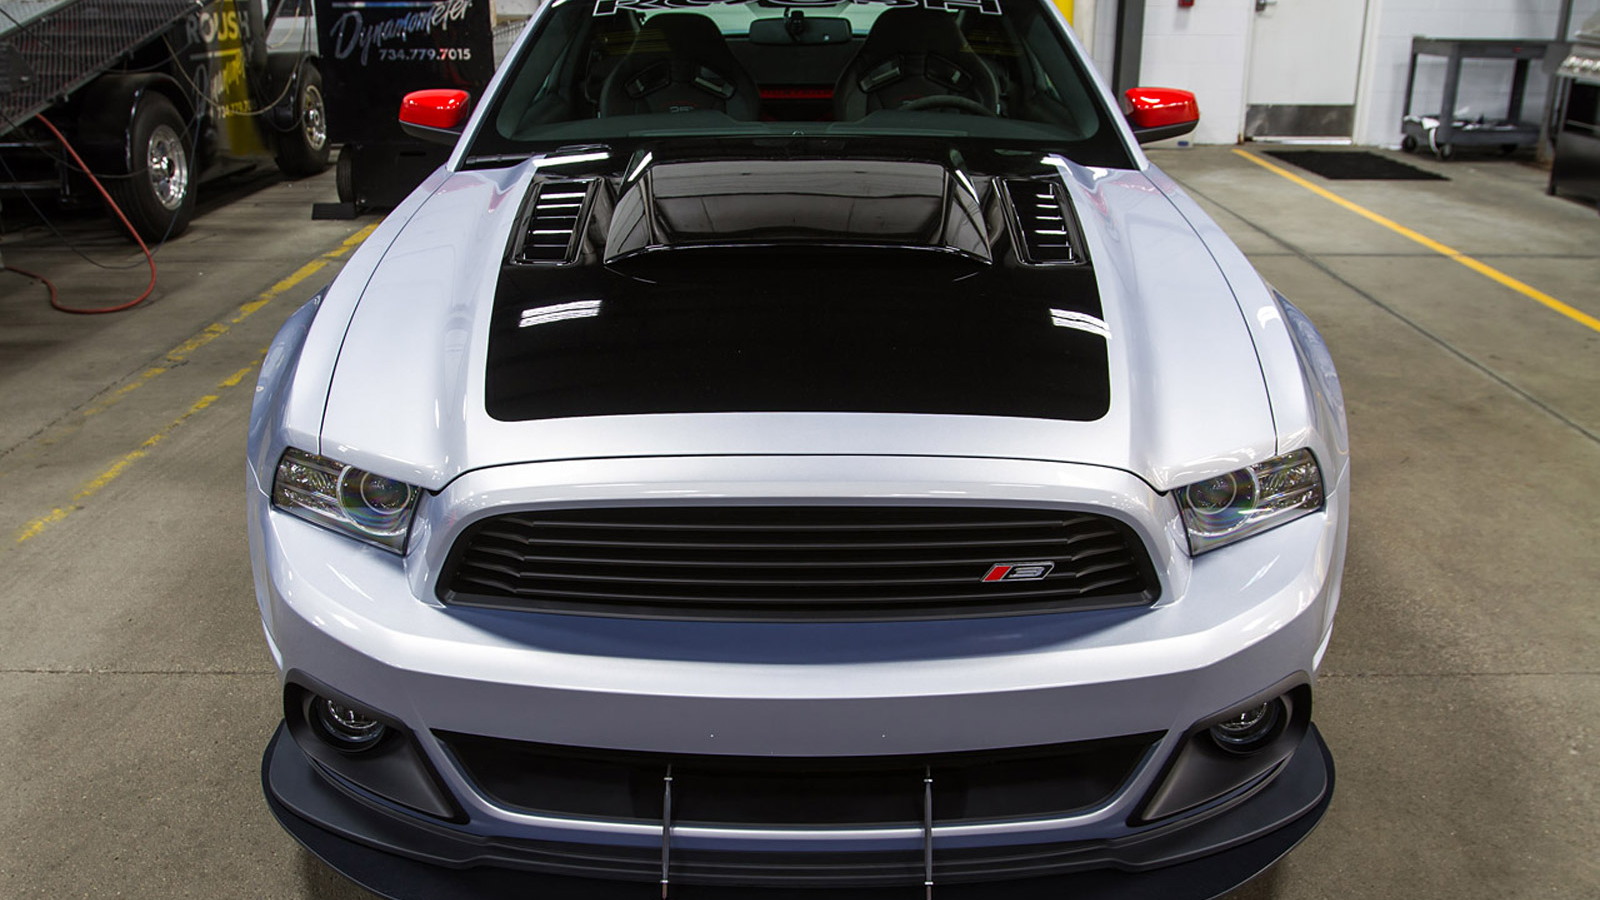 Roush Stage 3 2013 Ford Mustang auctioned at SAE Foundation charity event